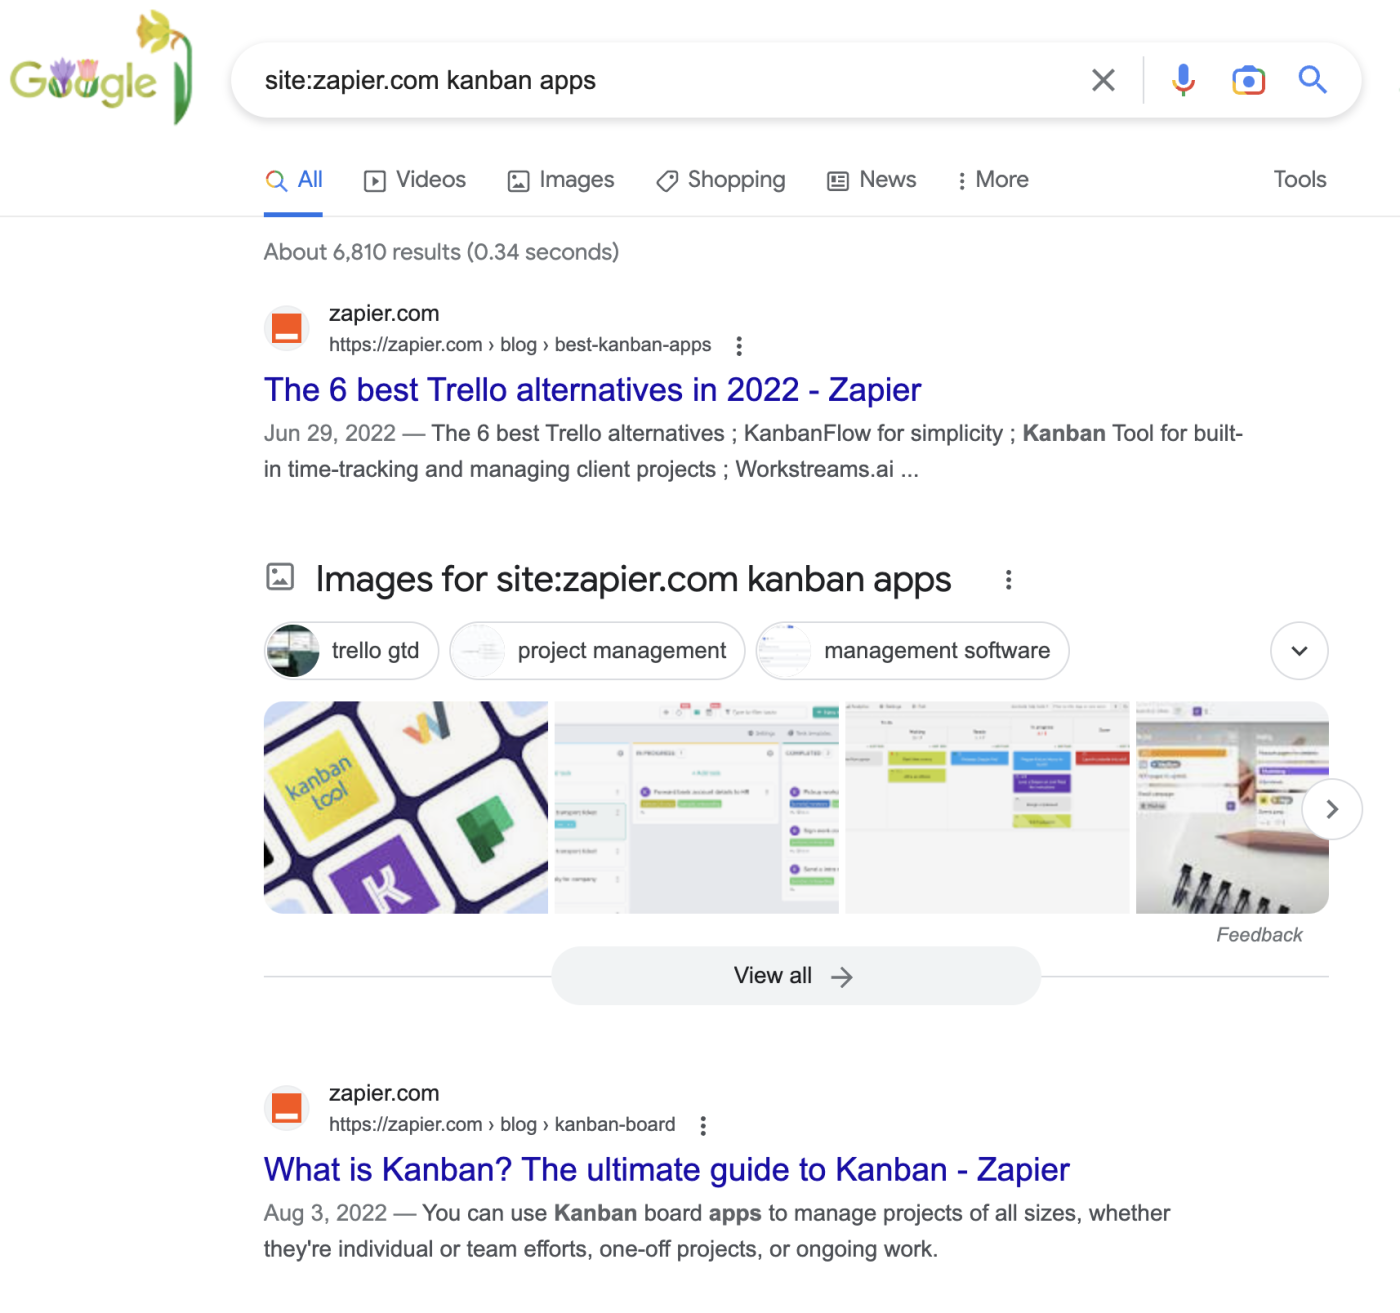 A portion of a Google Search results page with the search term site:zapier.com kanban apps in the search bar. The first two results are articles for Kanban tools by Zapier.